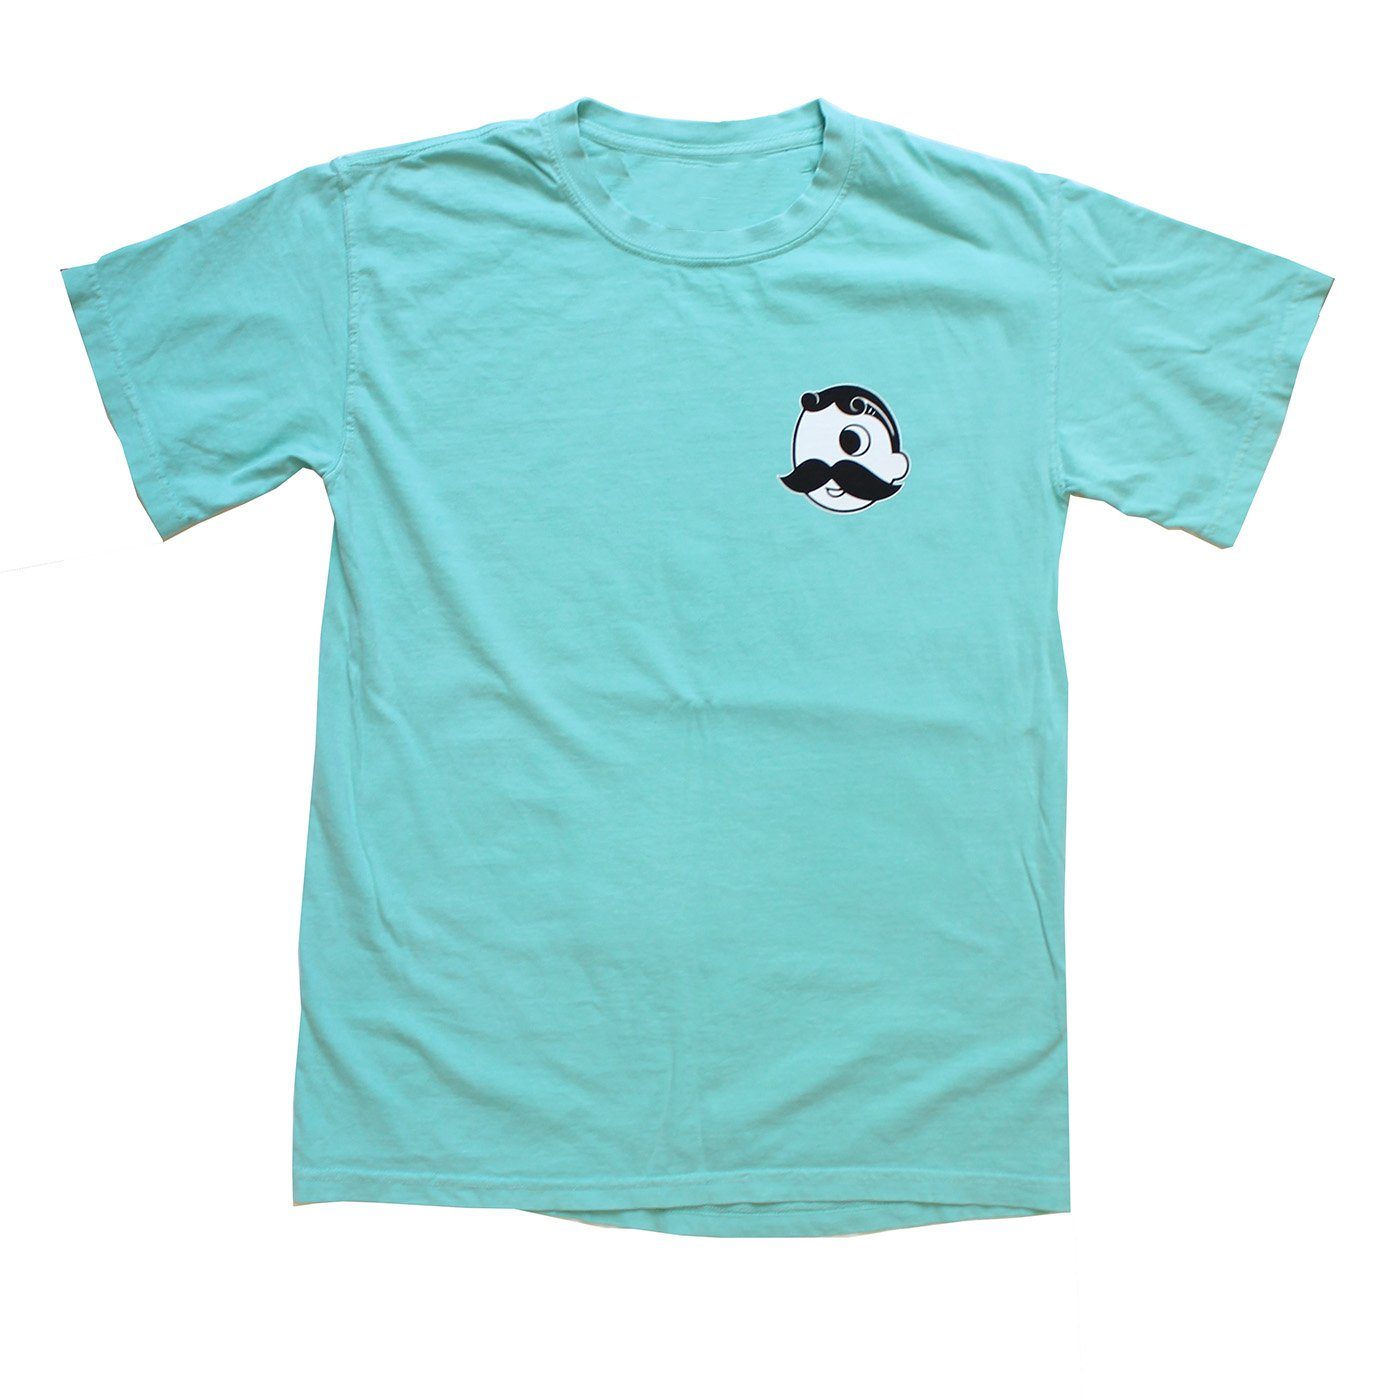 Natty Boh Lifeguard Stand (Chalky Mint) / Shirt - Route One Apparel